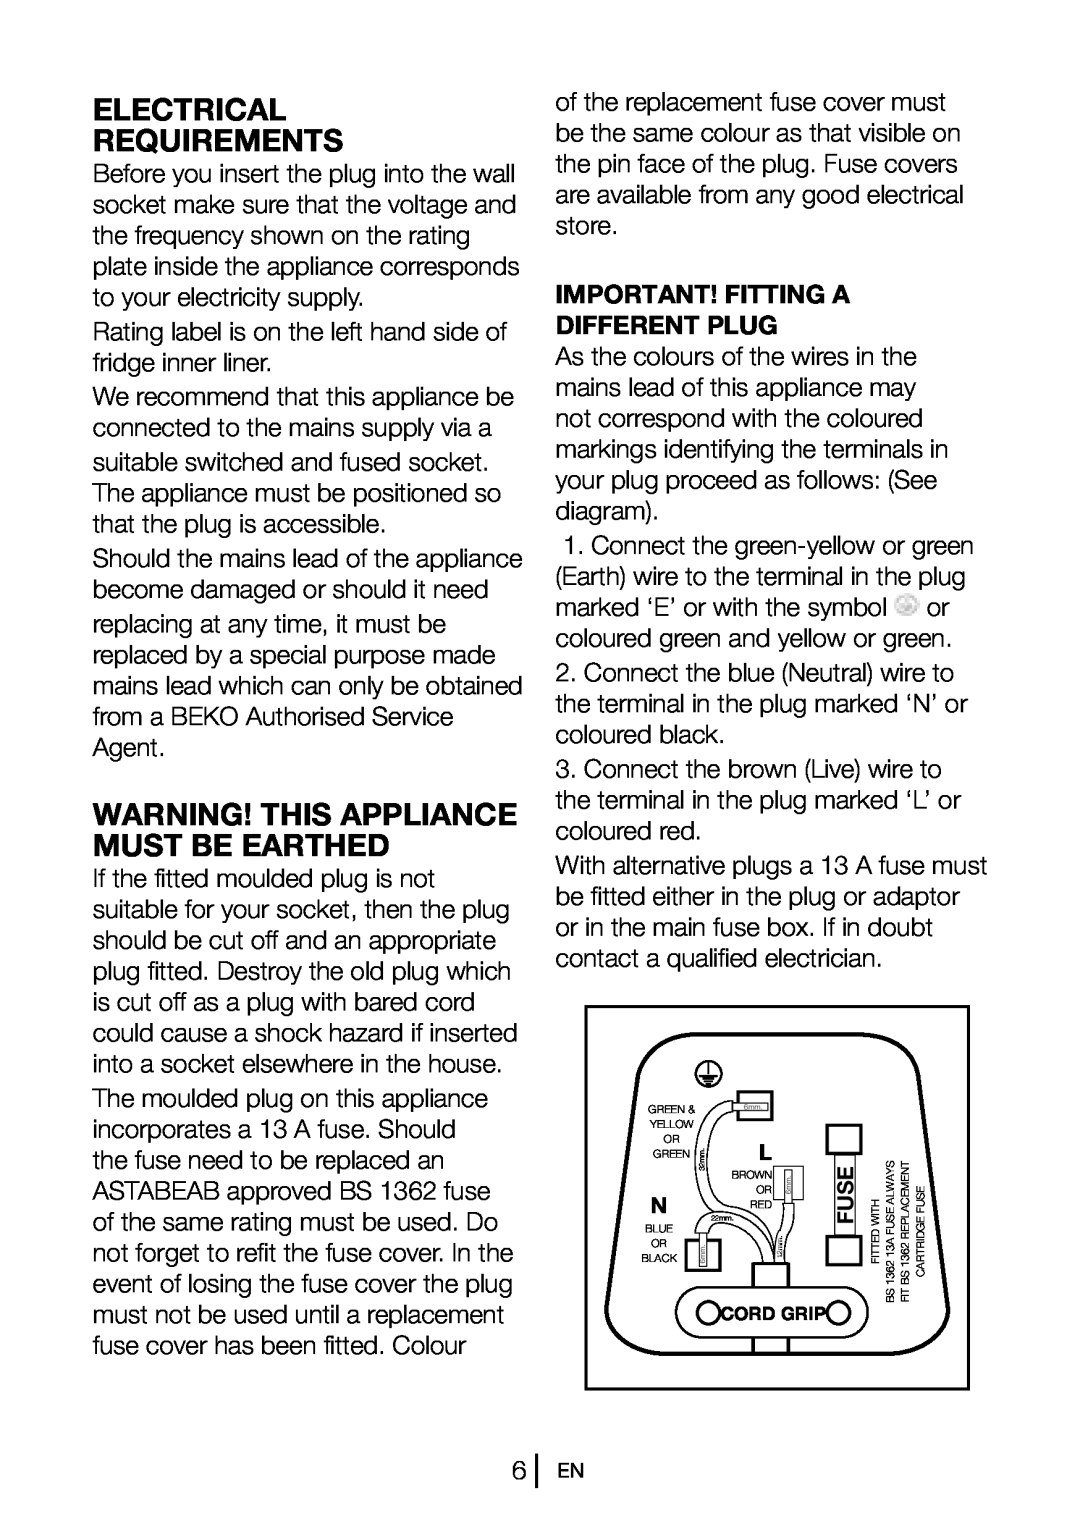 Beko CFD6914APB Electrical Requirements, Warning! This Appliance Must Be Earthed, Important! Fitting A Different Plug 